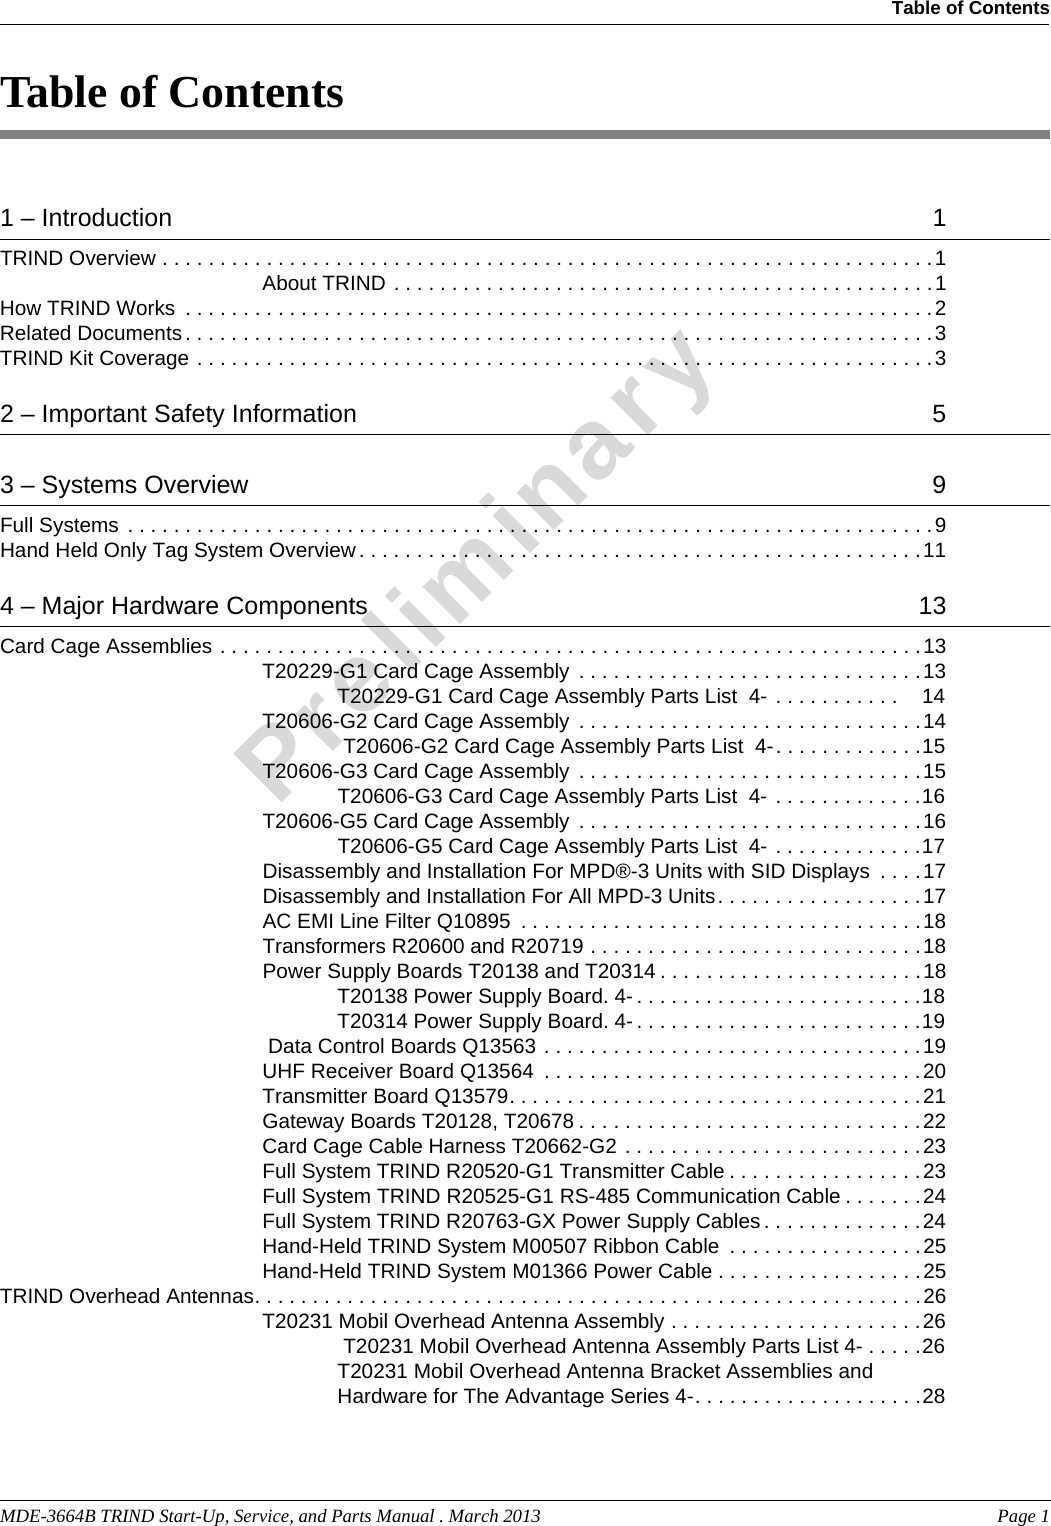 MDE-3664B TRIND Start-Up, Service, and Parts Manual . March 2013  Page 1Table of Contents PreliminaryTable of Contents1 – Introduction   1TRIND Overview . . . . . . . . . . . . . . . . . . . . . . . . . . . . . . . . . . . . . . . . . . . . . . . . . . . . . . . . . . . . . . . . . . .1About TRIND . . . . . . . . . . . . . . . . . . . . . . . . . . . . . . . . . . . . . . . . . . . . . . .1How TRIND Works  . . . . . . . . . . . . . . . . . . . . . . . . . . . . . . . . . . . . . . . . . . . . . . . . . . . . . . . . . . . . . . . . .2Related Documents. . . . . . . . . . . . . . . . . . . . . . . . . . . . . . . . . . . . . . . . . . . . . . . . . . . . . . . . . . . . . . . . .3TRIND Kit Coverage . . . . . . . . . . . . . . . . . . . . . . . . . . . . . . . . . . . . . . . . . . . . . . . . . . . . . . . . . . . . . . . .32 – Important Safety Information   53 – Systems Overview   9Full Systems . . . . . . . . . . . . . . . . . . . . . . . . . . . . . . . . . . . . . . . . . . . . . . . . . . . . . . . . . . . . . . . . . . . . . .9Hand Held Only Tag System Overview . . . . . . . . . . . . . . . . . . . . . . . . . . . . . . . . . . . . . . . . . . . . . . . . .114 – Major Hardware Components   13Card Cage Assemblies . . . . . . . . . . . . . . . . . . . . . . . . . . . . . . . . . . . . . . . . . . . . . . . . . . . . . . . . . . . . .13T20229-G1 Card Cage Assembly  . . . . . . . . . . . . . . . . . . . . . . . . . . . . . .13T20229-G1 Card Cage Assembly Parts List  4- . . . . . . . . . . .    14T20606-G2 Card Cage Assembly  . . . . . . . . . . . . . . . . . . . . . . . . . . . . . .14 T20606-G2 Card Cage Assembly Parts List  4-. . . . . . . . . . . . .15T20606-G3 Card Cage Assembly  . . . . . . . . . . . . . . . . . . . . . . . . . . . . . .15T20606-G3 Card Cage Assembly Parts List  4- . . . . . . . . . . . . .16T20606-G5 Card Cage Assembly  . . . . . . . . . . . . . . . . . . . . . . . . . . . . . .16T20606-G5 Card Cage Assembly Parts List  4- . . . . . . . . . . . . .17Disassembly and Installation For MPD®-3 Units with SID Displays  . . . .17Disassembly and Installation For All MPD-3 Units. . . . . . . . . . . . . . . . . .17AC EMI Line Filter Q10895  . . . . . . . . . . . . . . . . . . . . . . . . . . . . . . . . . . .18Transformers R20600 and R20719 . . . . . . . . . . . . . . . . . . . . . . . . . . . . .18Power Supply Boards T20138 and T20314 . . . . . . . . . . . . . . . . . . . . . . .18T20138 Power Supply Board. 4- . . . . . . . . . . . . . . . . . . . . . . . . .18T20314 Power Supply Board. 4- . . . . . . . . . . . . . . . . . . . . . . . . .19 Data Control Boards Q13563 . . . . . . . . . . . . . . . . . . . . . . . . . . . . . . . . .19UHF Receiver Board Q13564  . . . . . . . . . . . . . . . . . . . . . . . . . . . . . . . . .20Transmitter Board Q13579. . . . . . . . . . . . . . . . . . . . . . . . . . . . . . . . . . . .21Gateway Boards T20128, T20678 . . . . . . . . . . . . . . . . . . . . . . . . . . . . . .22Card Cage Cable Harness T20662-G2 . . . . . . . . . . . . . . . . . . . . . . . . . .23Full System TRIND R20520-G1 Transmitter Cable . . . . . . . . . . . . . . . . .23Full System TRIND R20525-G1 RS-485 Communication Cable . . . . . . .24Full System TRIND R20763-GX Power Supply Cables . . . . . . . . . . . . . .24Hand-Held TRIND System M00507 Ribbon Cable  . . . . . . . . . . . . . . . . .25Hand-Held TRIND System M01366 Power Cable . . . . . . . . . . . . . . . . . .25TRIND Overhead Antennas. . . . . . . . . . . . . . . . . . . . . . . . . . . . . . . . . . . . . . . . . . . . . . . . . . . . . . . . . .26T20231 Mobil Overhead Antenna Assembly . . . . . . . . . . . . . . . . . . . . . .26 T20231 Mobil Overhead Antenna Assembly Parts List 4- . . . . .26T20231 Mobil Overhead Antenna Bracket Assemblies and Hardware for The Advantage Series 4-. . . . . . . . . . . . . . . . . . . .28